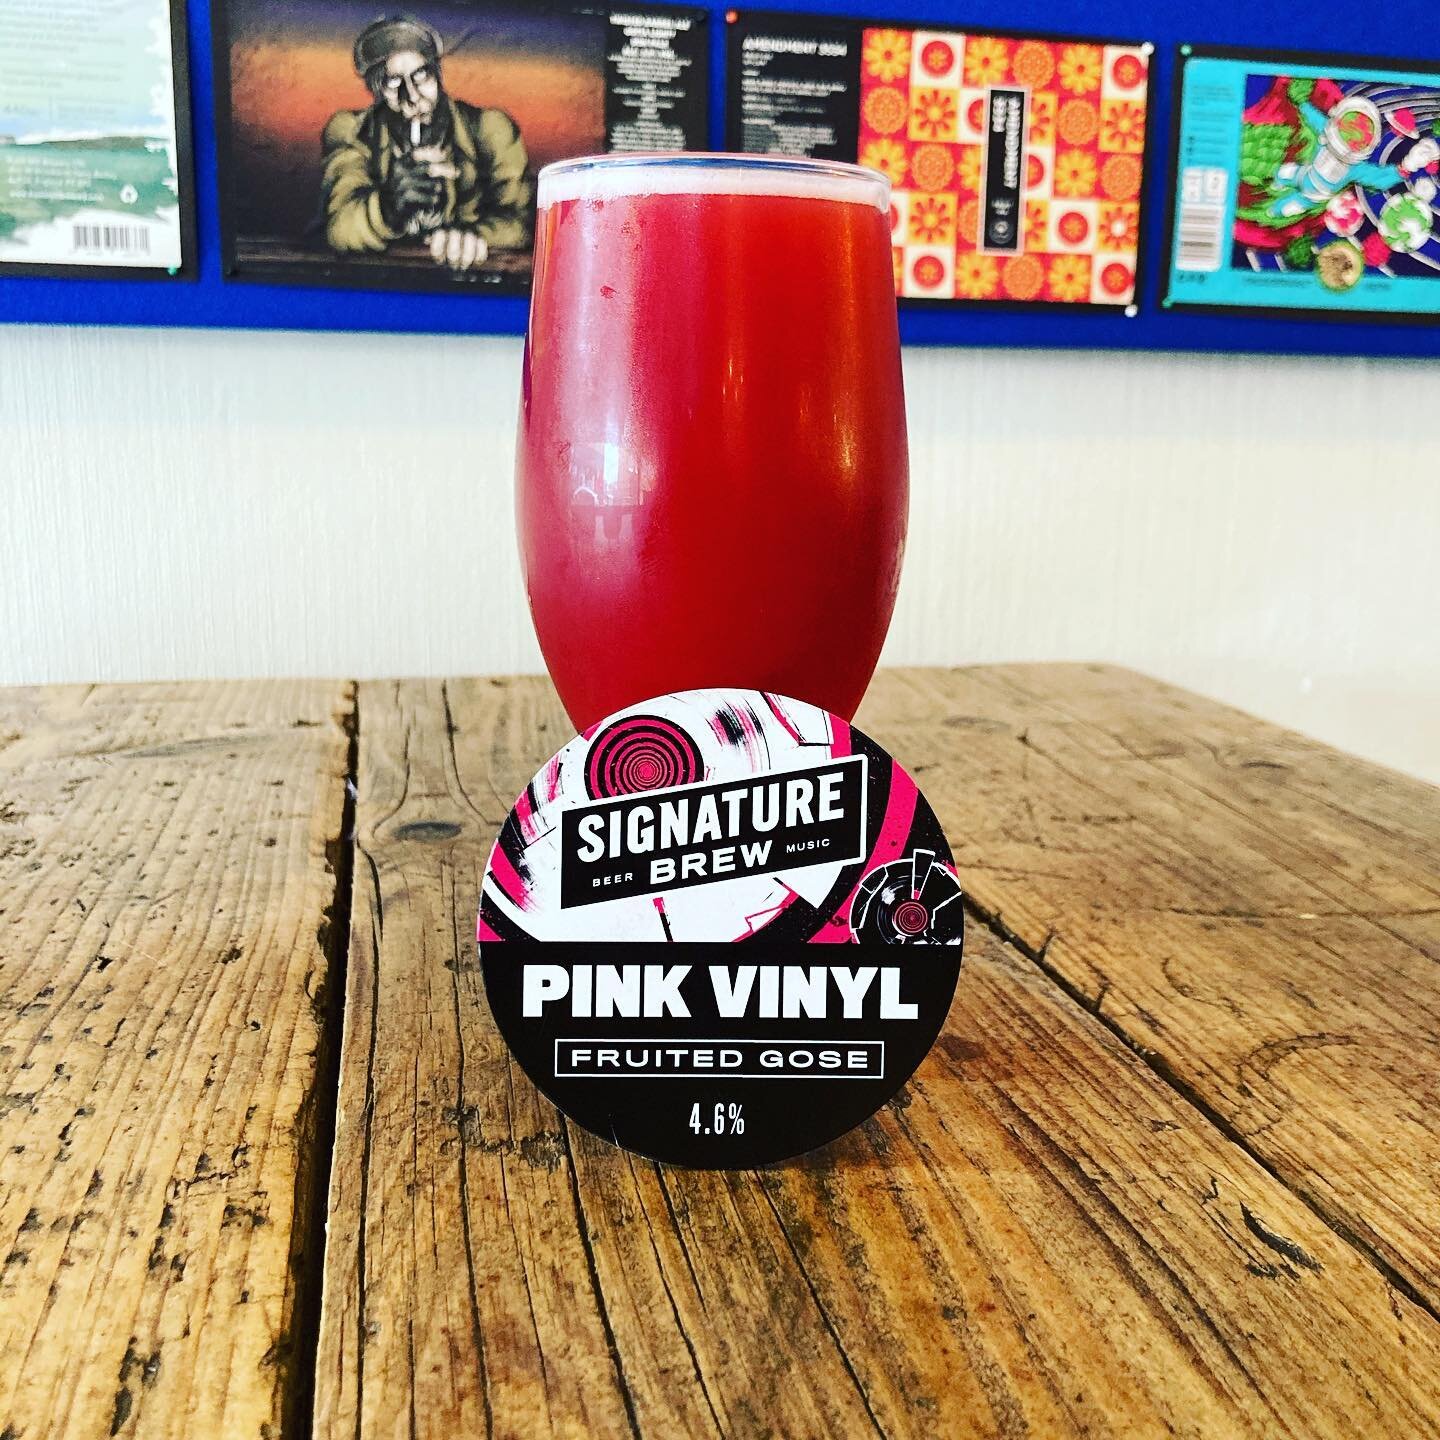 ✨Sour Is Back✨
For all you sour beer lovers out the we have an awesome new beer on tap today here @wildkitebottleshop 

Signature Brew &lsquo;Pink Vinyl&rsquo; Fruited Gose 4.6% abv.  @signaturebrew 
Black Cherry 🍒 and Raspberry flavours.